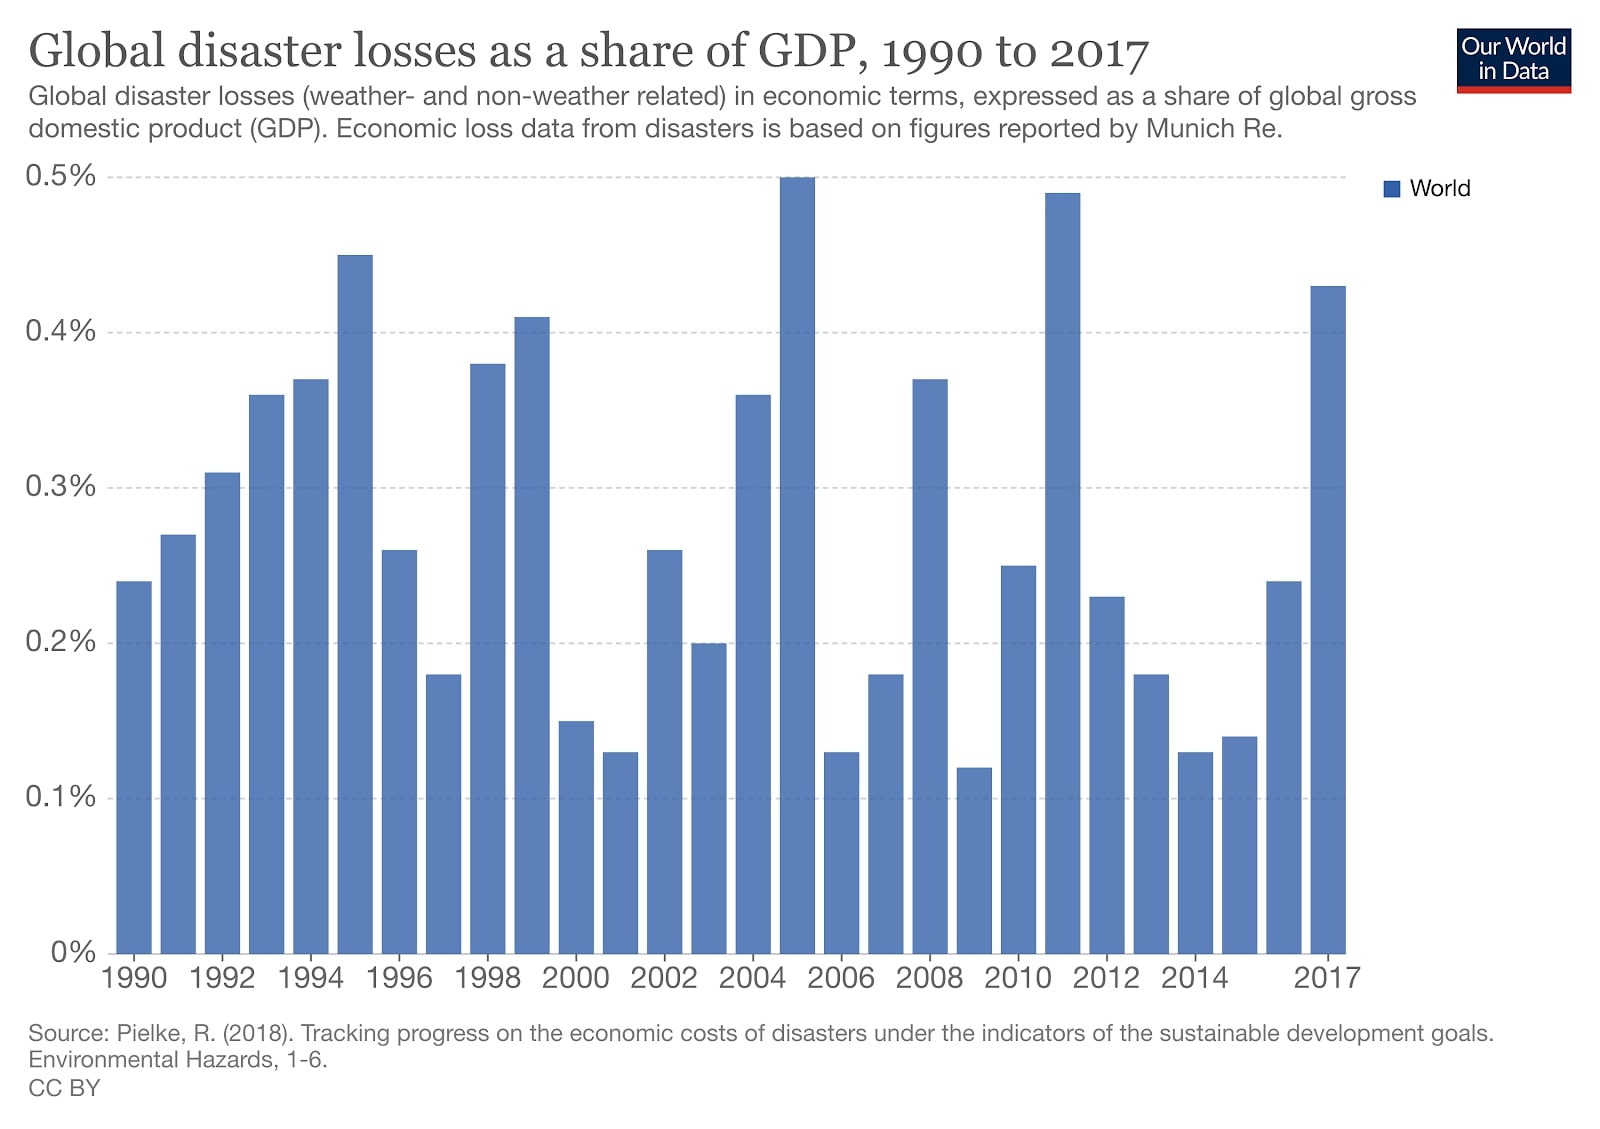 global disaster loss as a share of GDP